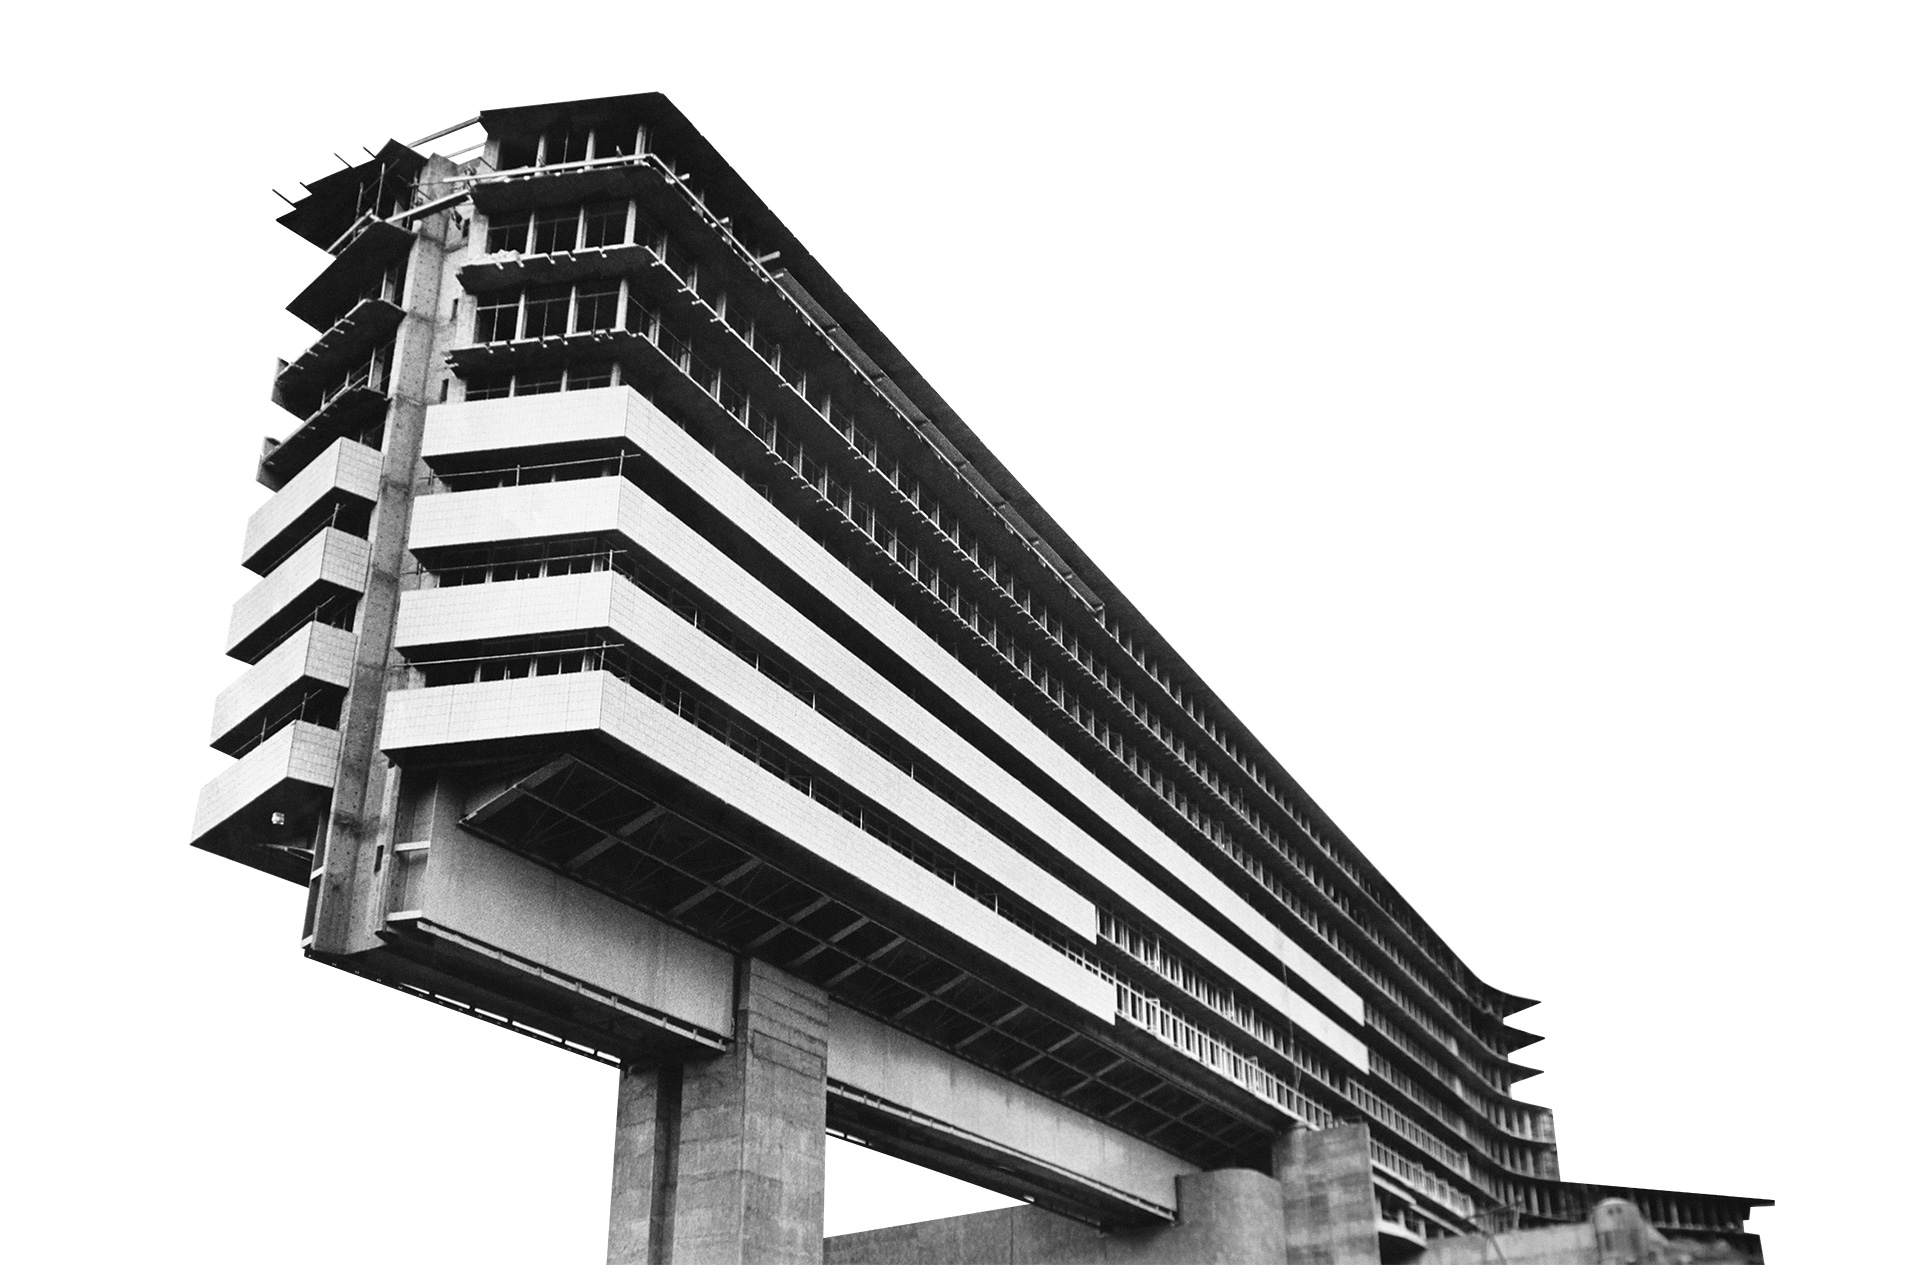 <p>Unisa’s “imposing new home” on Muckleneuk Ridge is officially opened by State President J.J. “Jim” Fouché.</p>